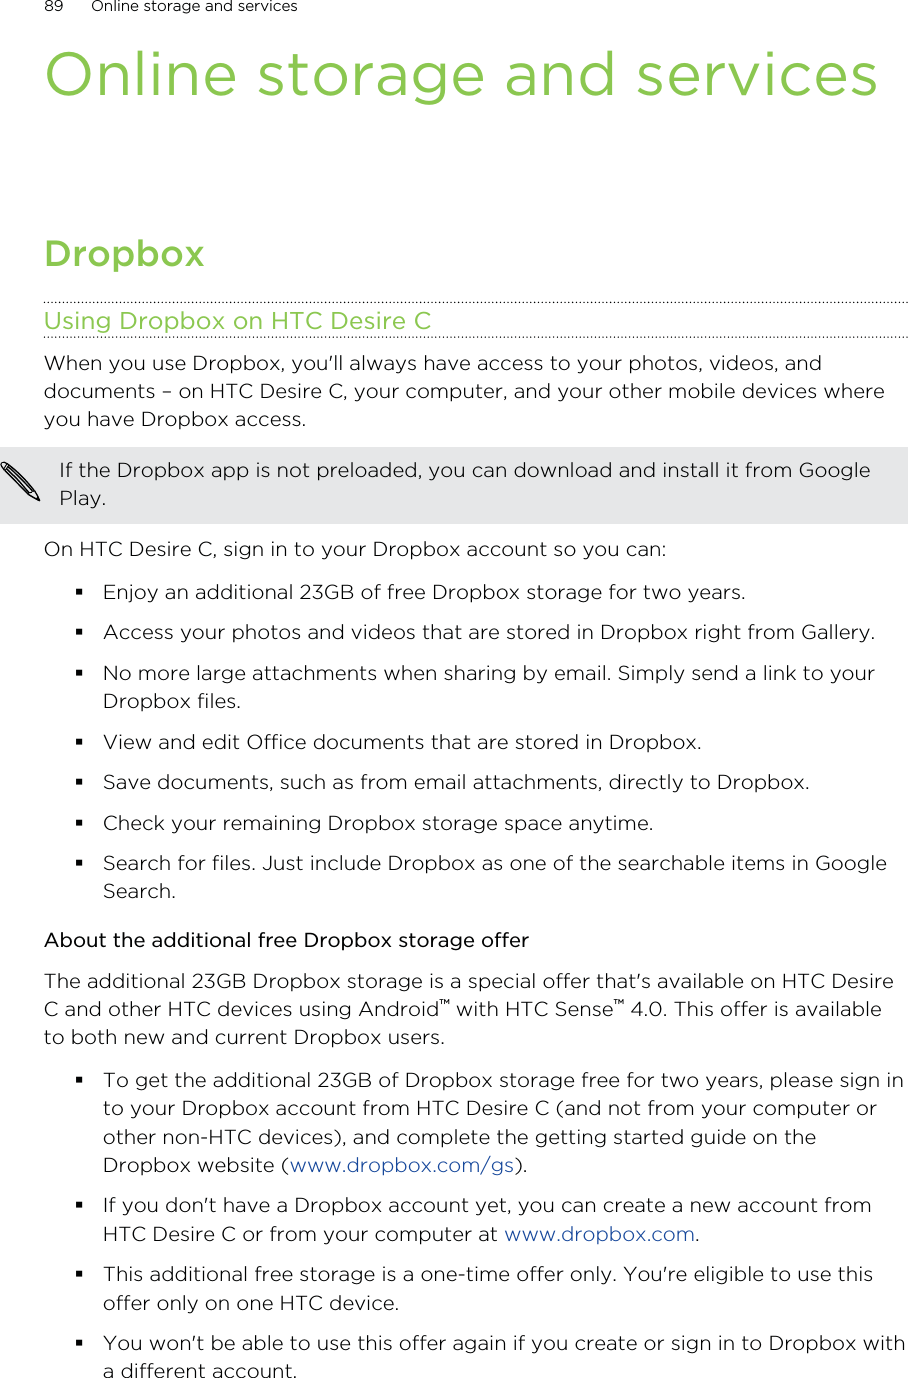 Online storage and servicesDropboxUsing Dropbox on HTC Desire CWhen you use Dropbox, you&apos;ll always have access to your photos, videos, anddocuments – on HTC Desire C, your computer, and your other mobile devices whereyou have Dropbox access.If the Dropbox app is not preloaded, you can download and install it from GooglePlay.On HTC Desire C, sign in to your Dropbox account so you can:Enjoy an additional 23GB of free Dropbox storage for two years.Access your photos and videos that are stored in Dropbox right from Gallery.No more large attachments when sharing by email. Simply send a link to yourDropbox files.View and edit Office documents that are stored in Dropbox.Save documents, such as from email attachments, directly to Dropbox.Check your remaining Dropbox storage space anytime.Search for files. Just include Dropbox as one of the searchable items in GoogleSearch.About the additional free Dropbox storage offerThe additional 23GB Dropbox storage is a special offer that&apos;s available on HTC DesireC and other HTC devices using Android™ with HTC Sense™ 4.0. This offer is availableto both new and current Dropbox users.To get the additional 23GB of Dropbox storage free for two years, please sign into your Dropbox account from HTC Desire C (and not from your computer orother non-HTC devices), and complete the getting started guide on theDropbox website (www.dropbox.com/gs).If you don&apos;t have a Dropbox account yet, you can create a new account fromHTC Desire C or from your computer at www.dropbox.com.This additional free storage is a one-time offer only. You&apos;re eligible to use thisoffer only on one HTC device.You won&apos;t be able to use this offer again if you create or sign in to Dropbox witha different account.89 Online storage and services